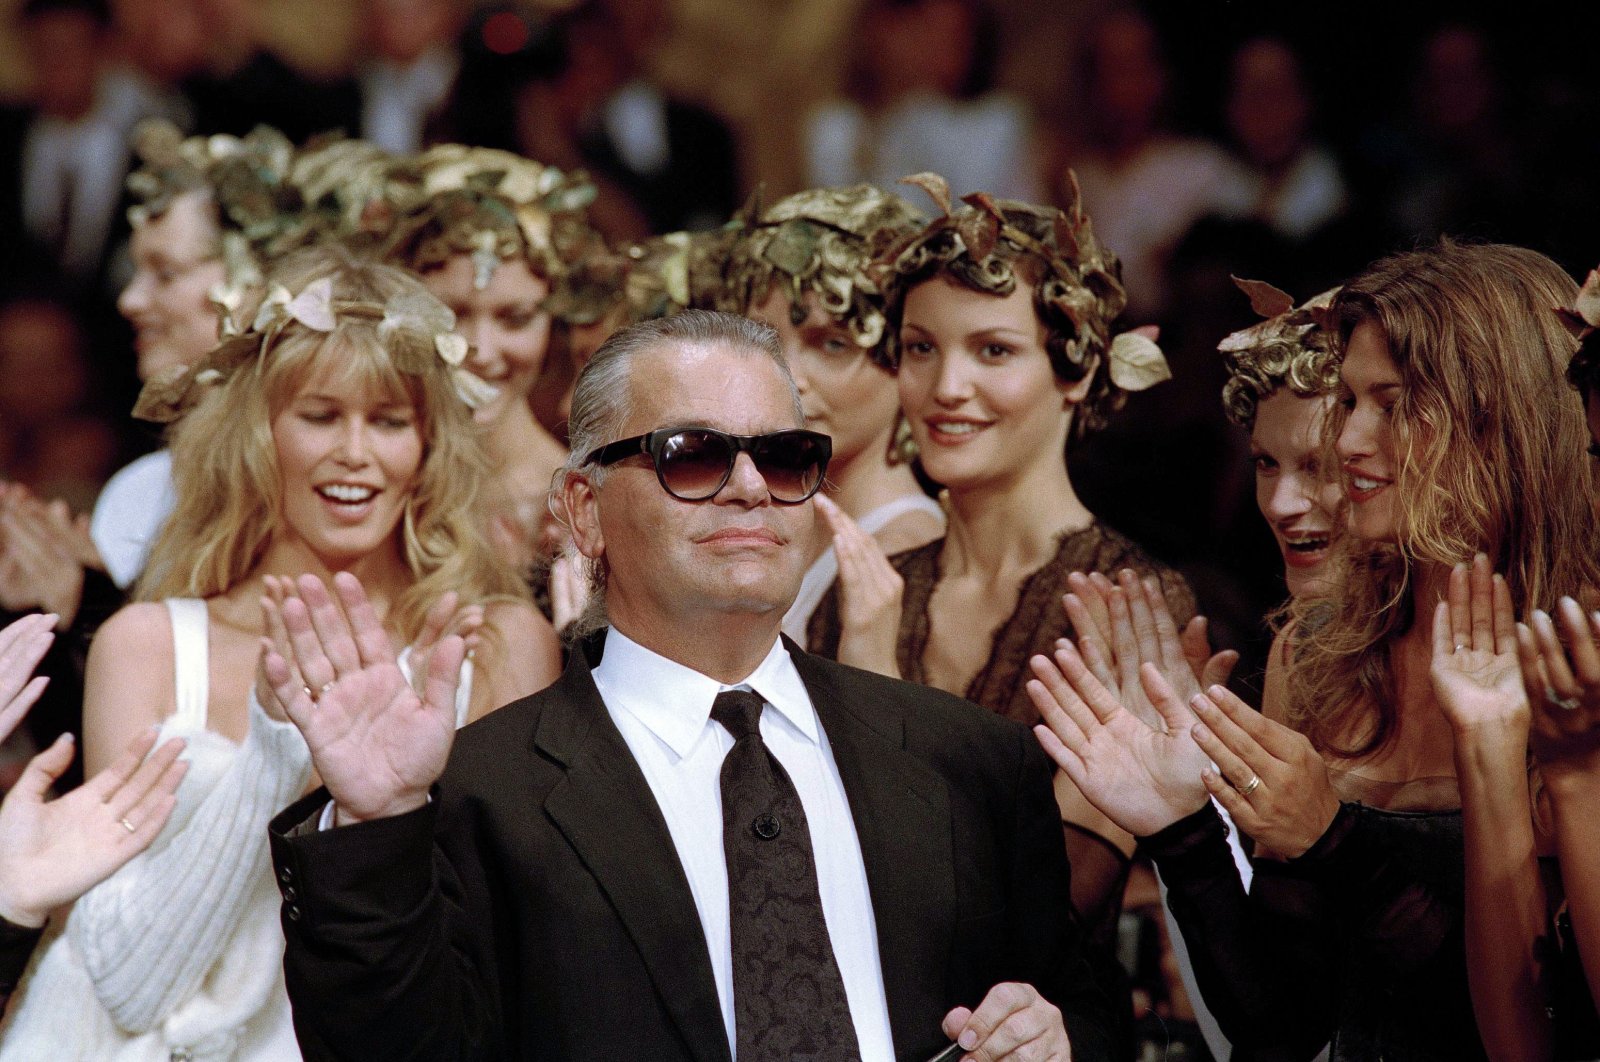 German fashion designer Karl Lagerfeld acknowledges the applause of his models at the end of the show he designed for the French fashion house Chanel, for the 1993-94 Fall-Winter haute couture collection, Paris, France, July 20, 1993. (AP Photo)